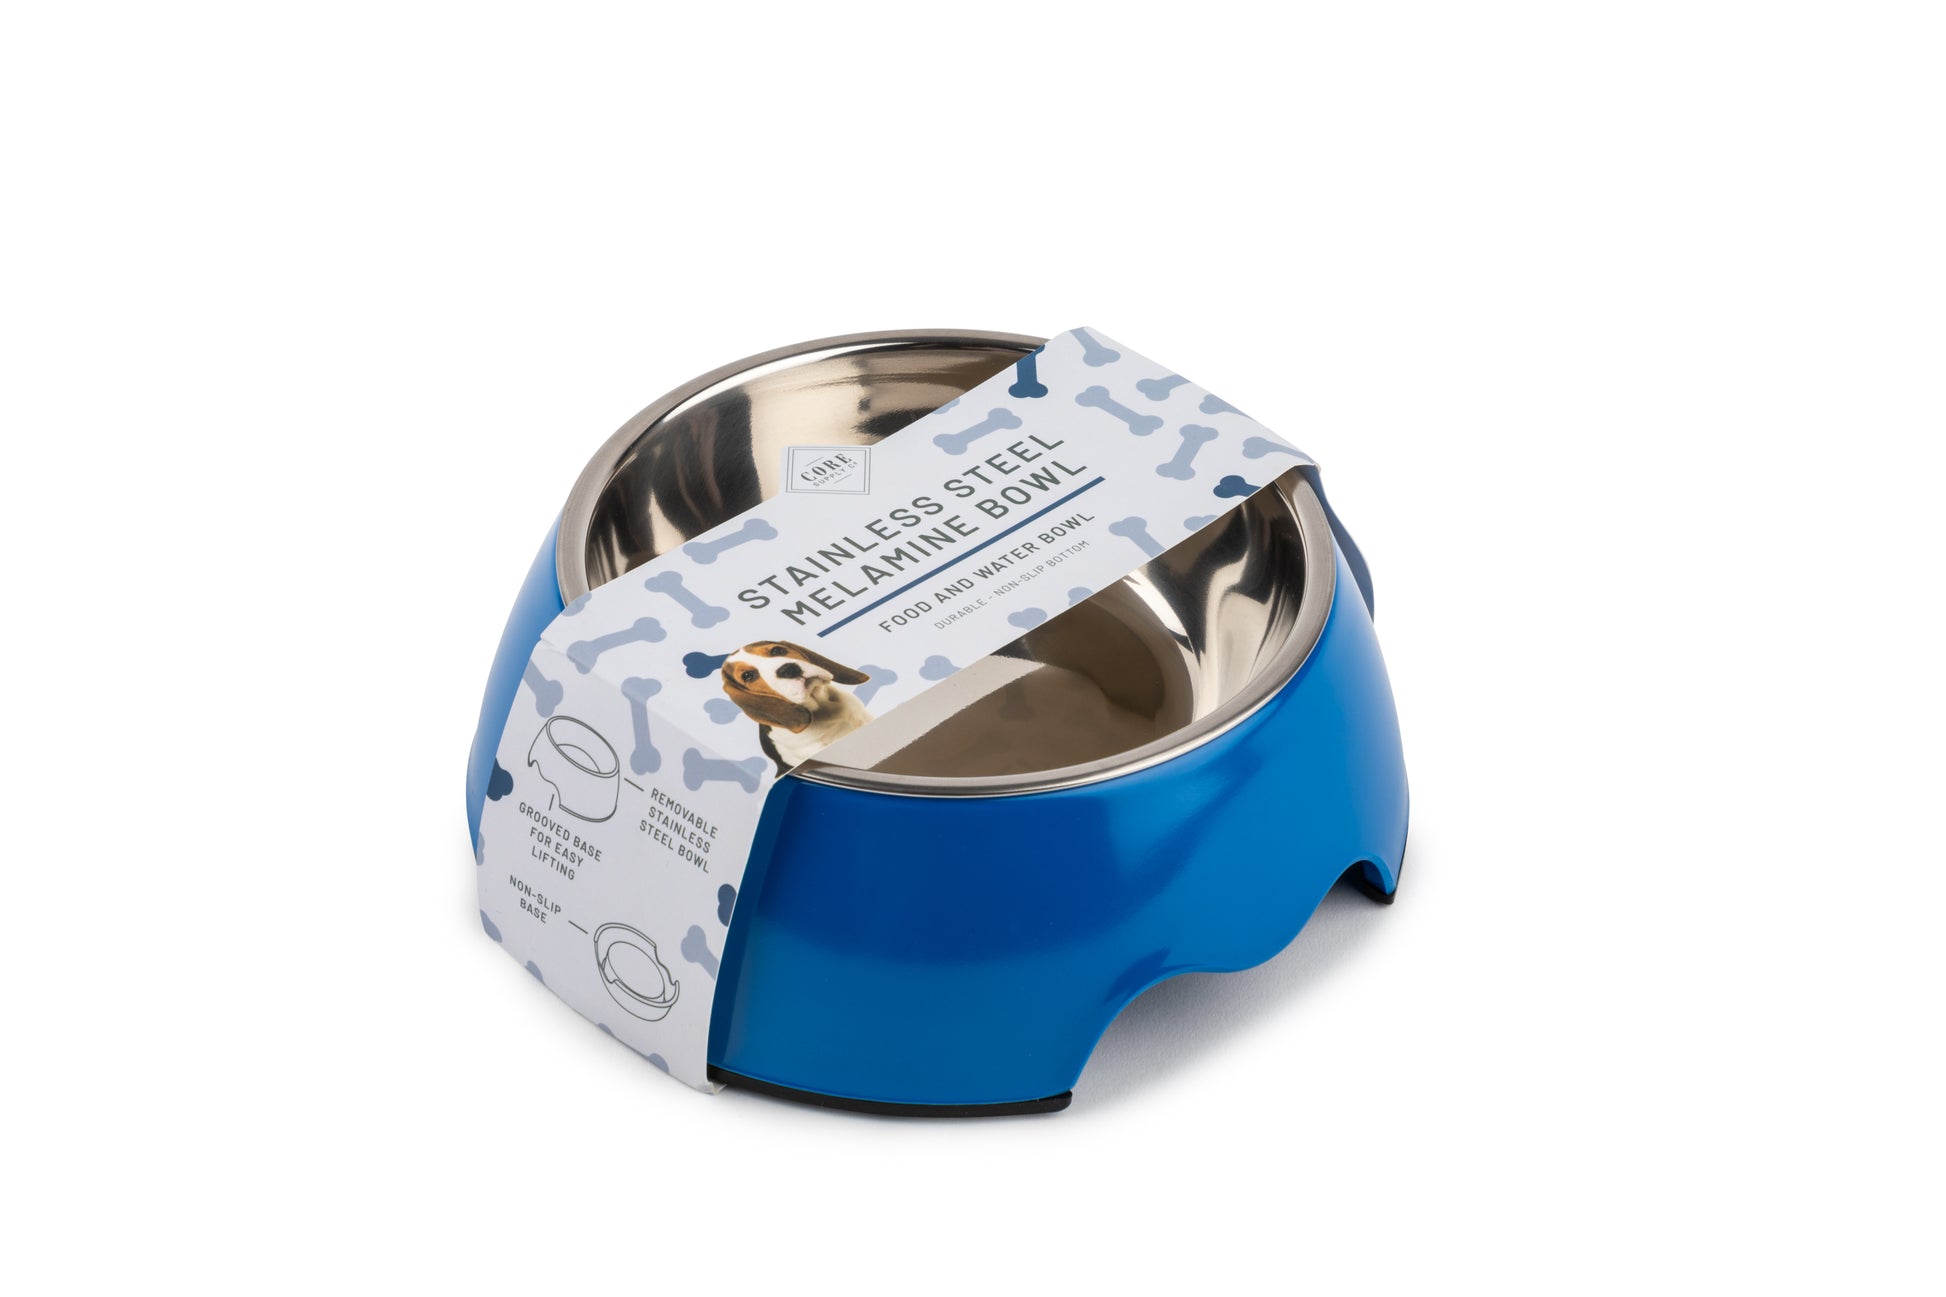 Blue removable stainless steel food and water bowl in a non slip base